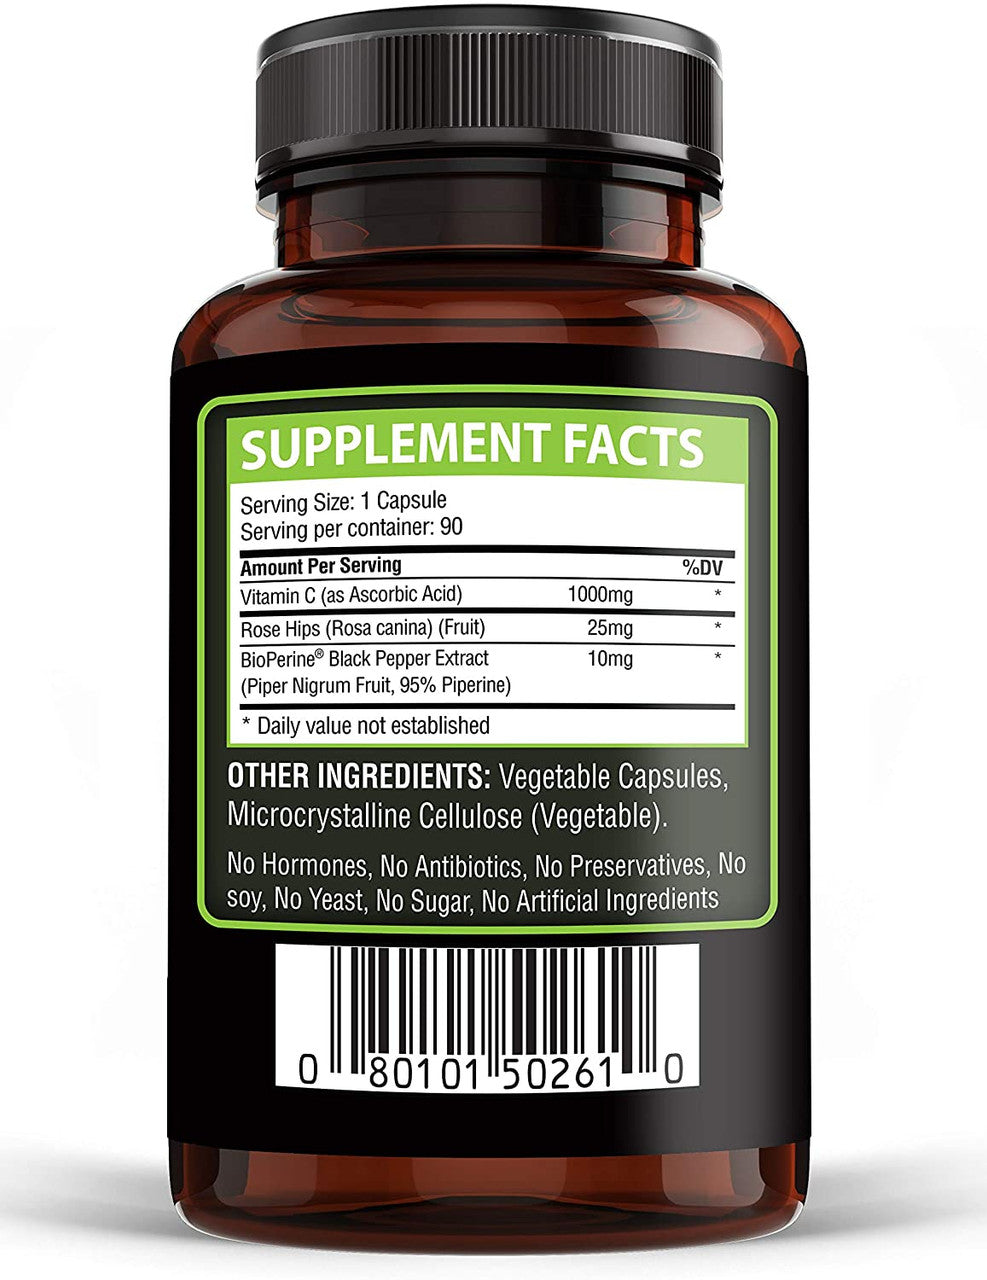 Golden Naturals Vitamin C With Rose Hips Supplement Facts Label